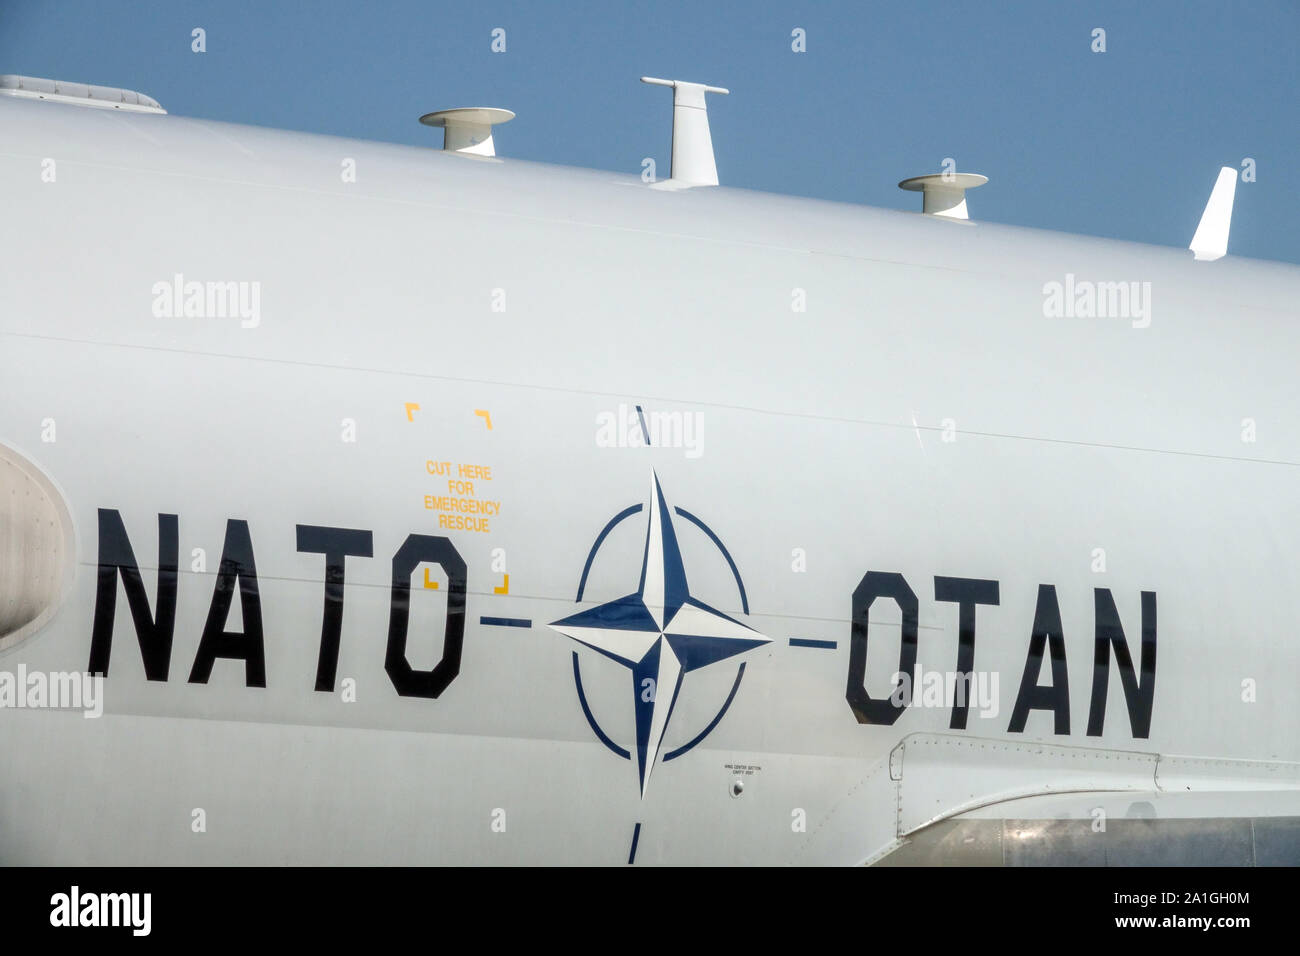 NATO logo on the side of the Boeing E 3A Sentry AWACS Stock Photo